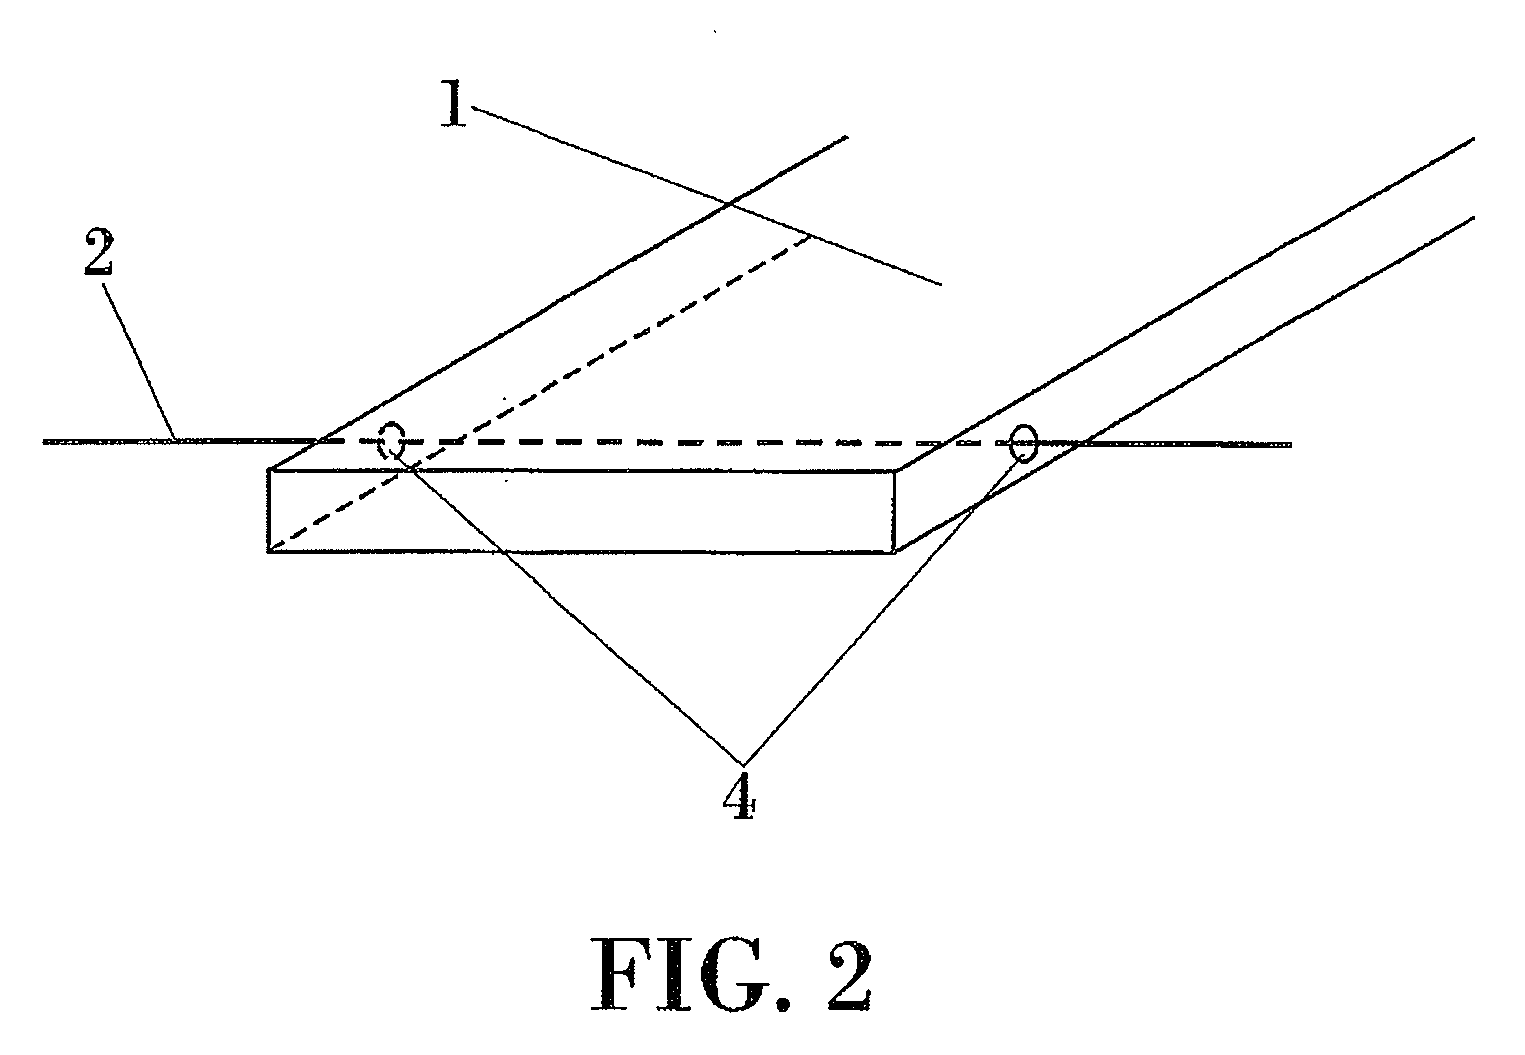 Anti-theft device for solar panels